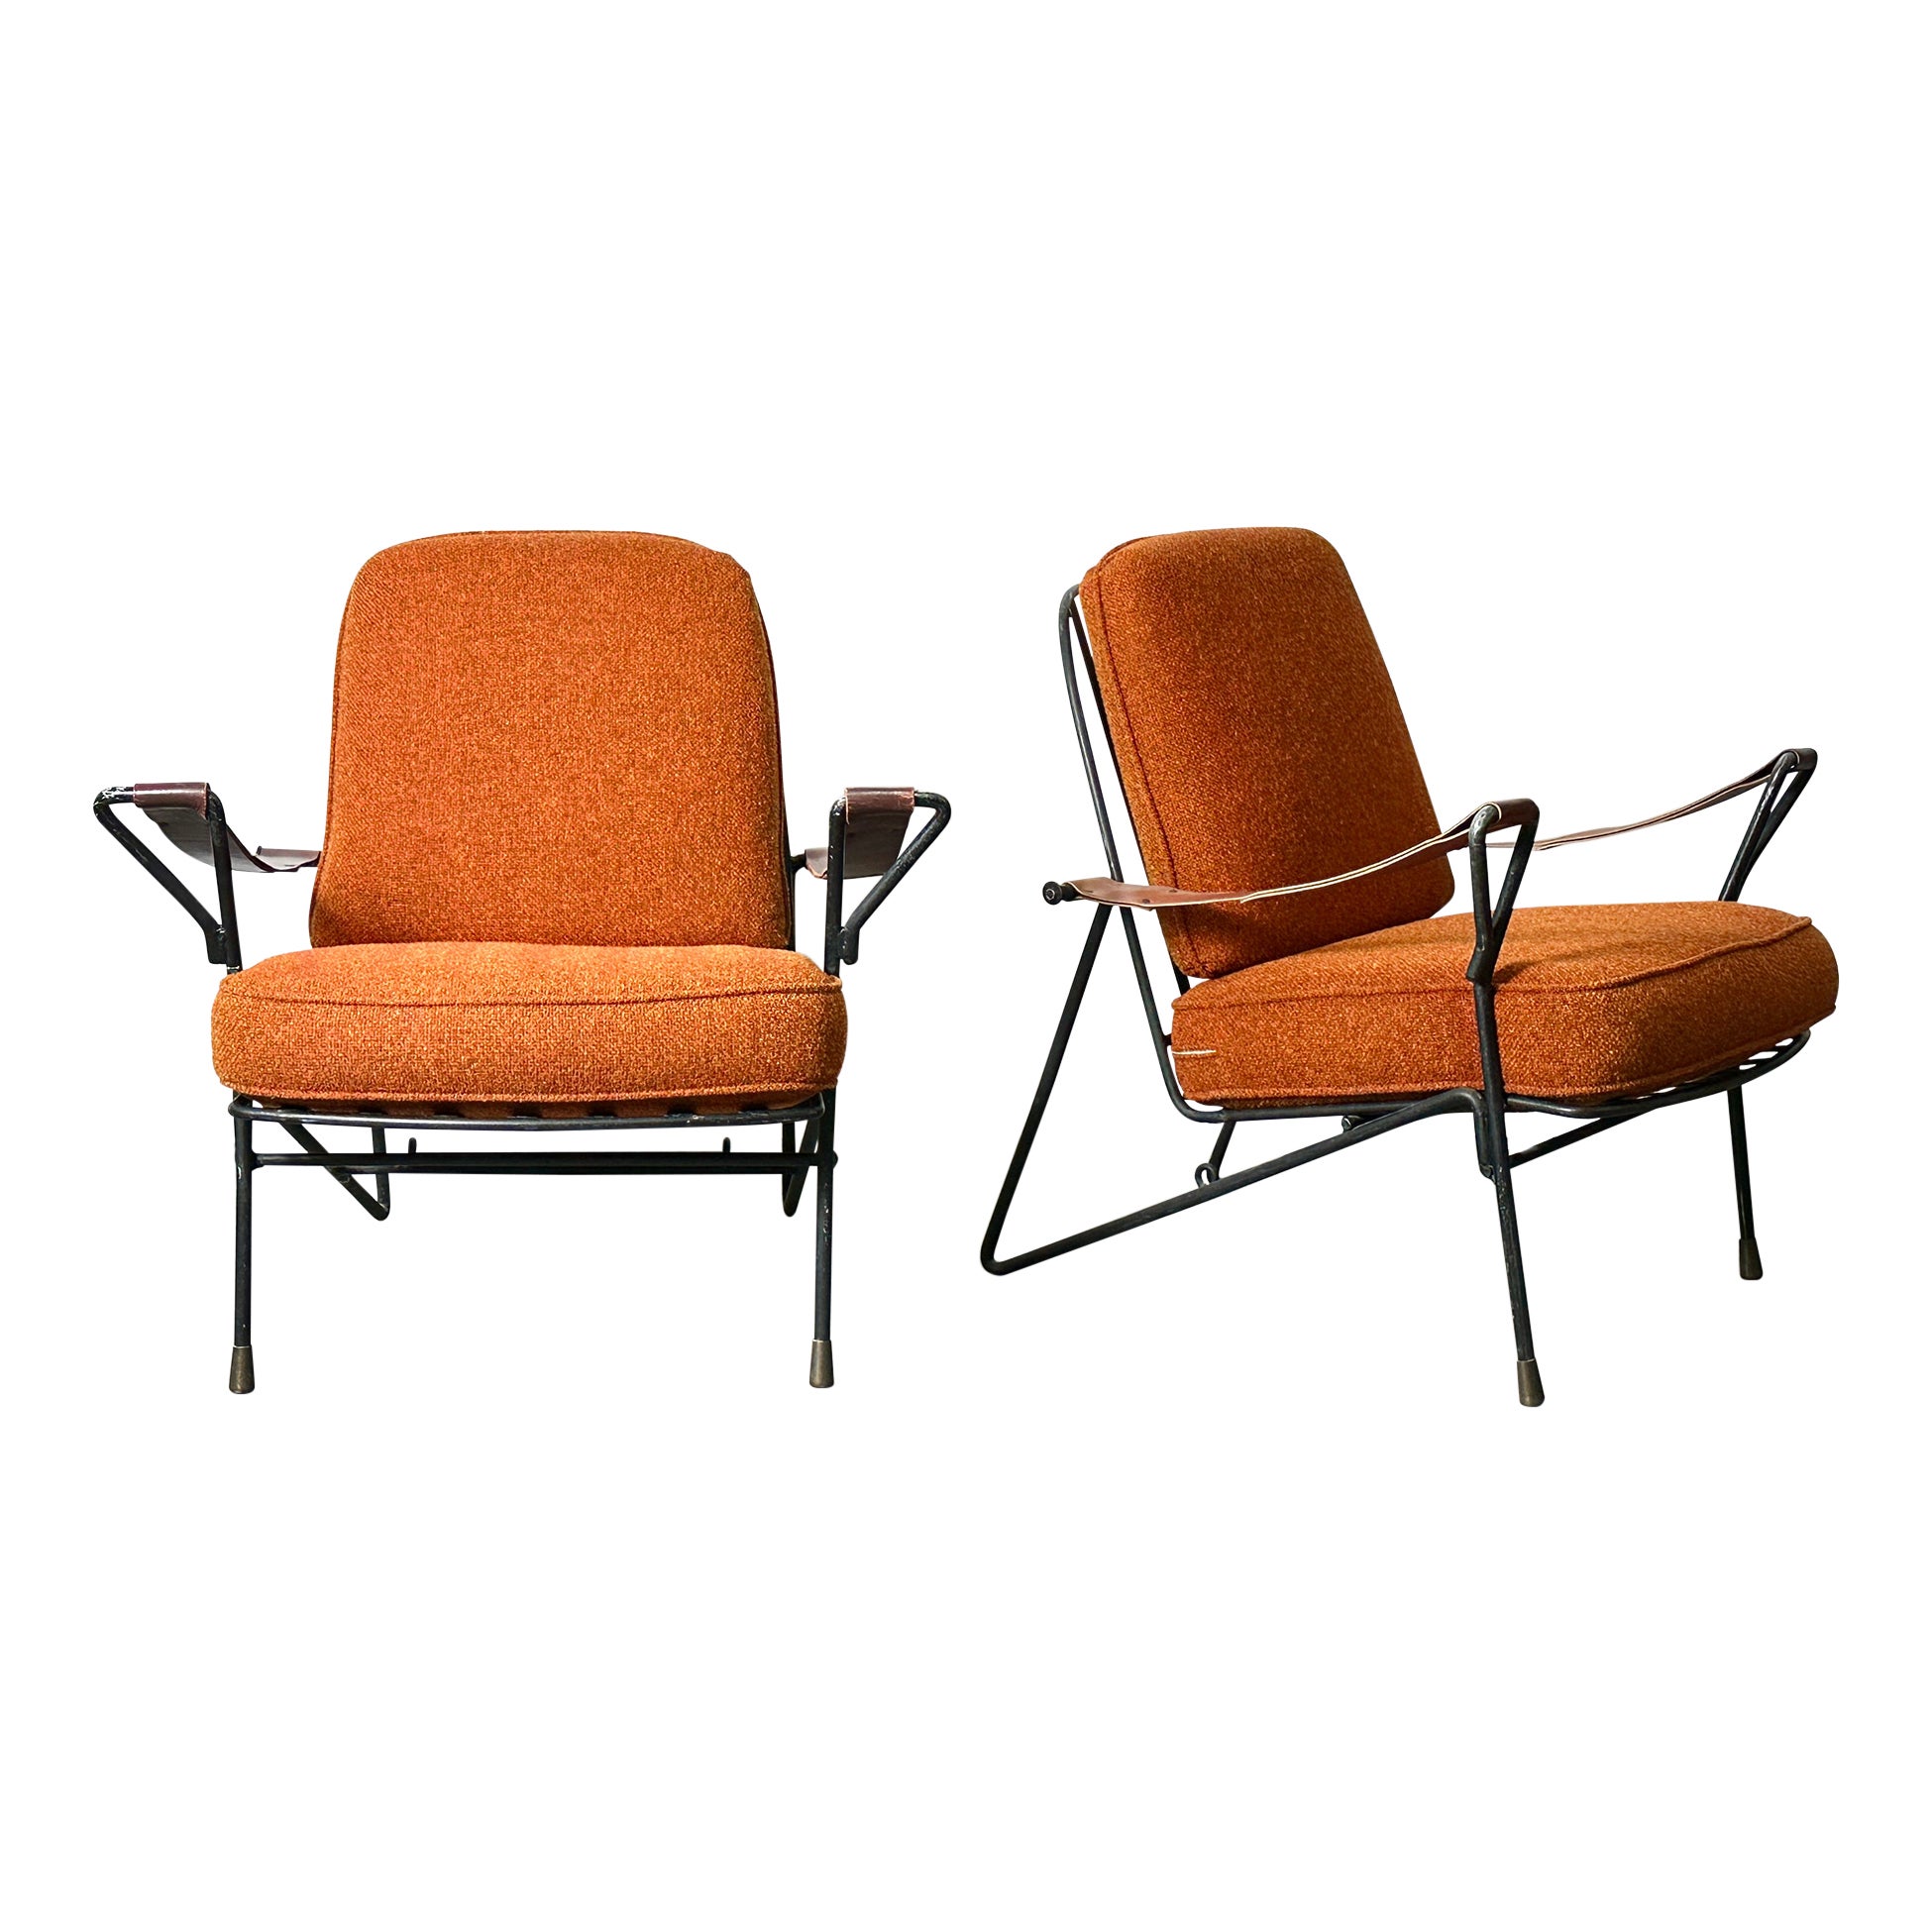 A Pair of Vintage Mid Century Mexican Modern Iron Leather Lounge Chairs 1950s For Sale